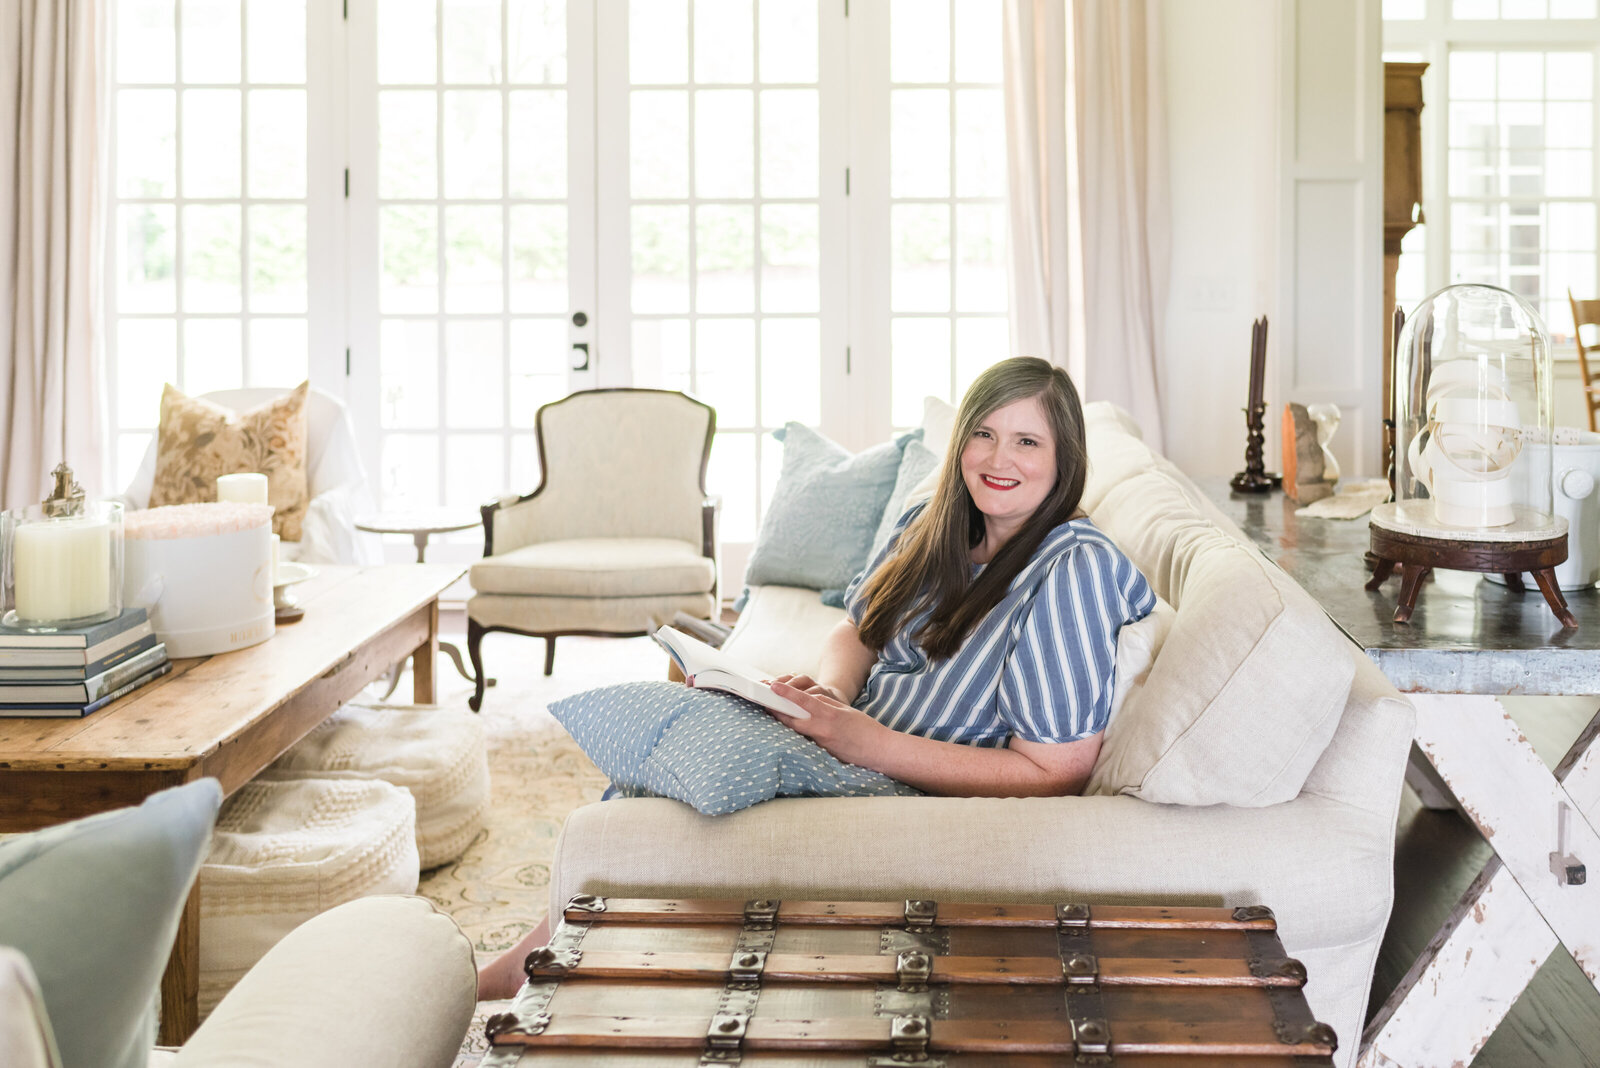 Inherited and Co. founder, Lauren Klein, sits in her light-filled living room in a blue and white striped dress